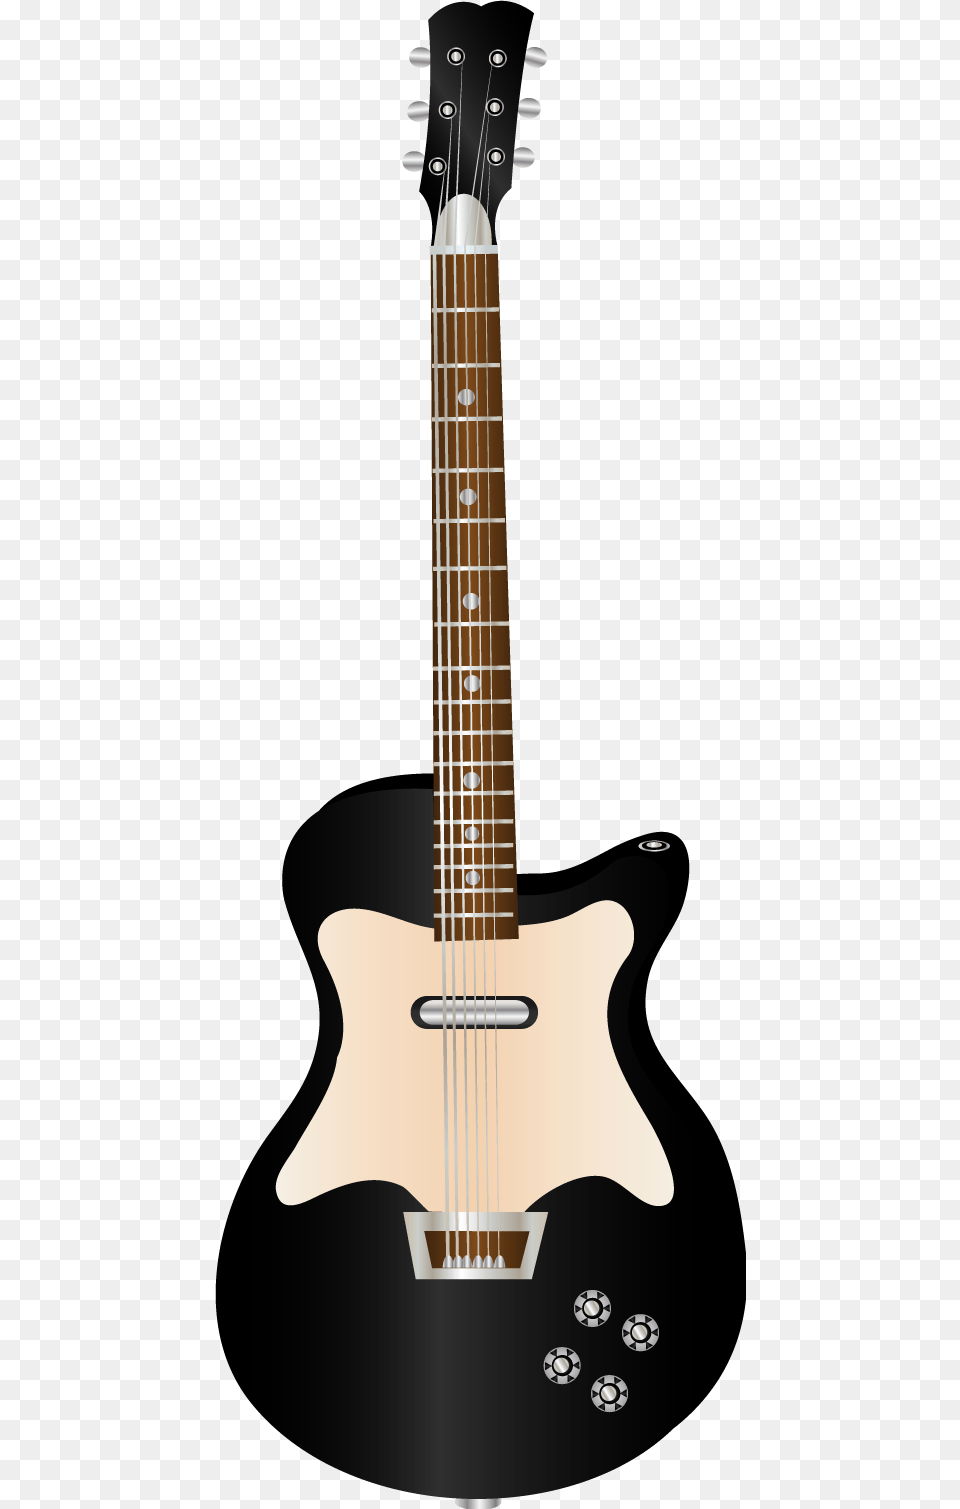 Gibson Les Paul Musical Instrument Electric Guitar Music Instruments Guitar, Musical Instrument, Electric Guitar, Bass Guitar Png Image